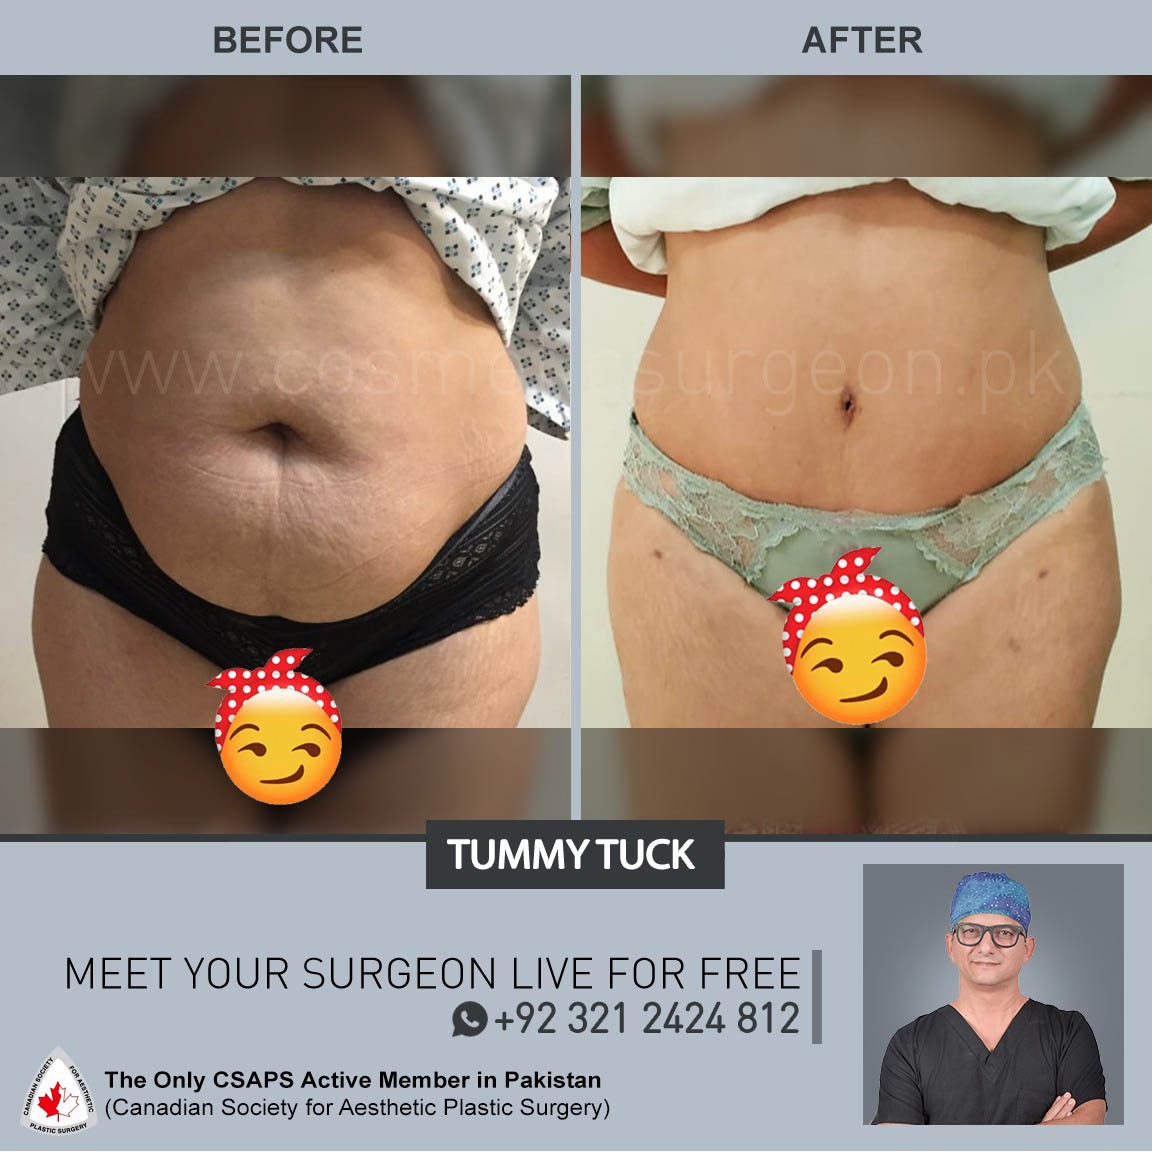 Introducing Lipo 360 with the Tummy Tuck in Pakistan - Cosmetic Surgeon